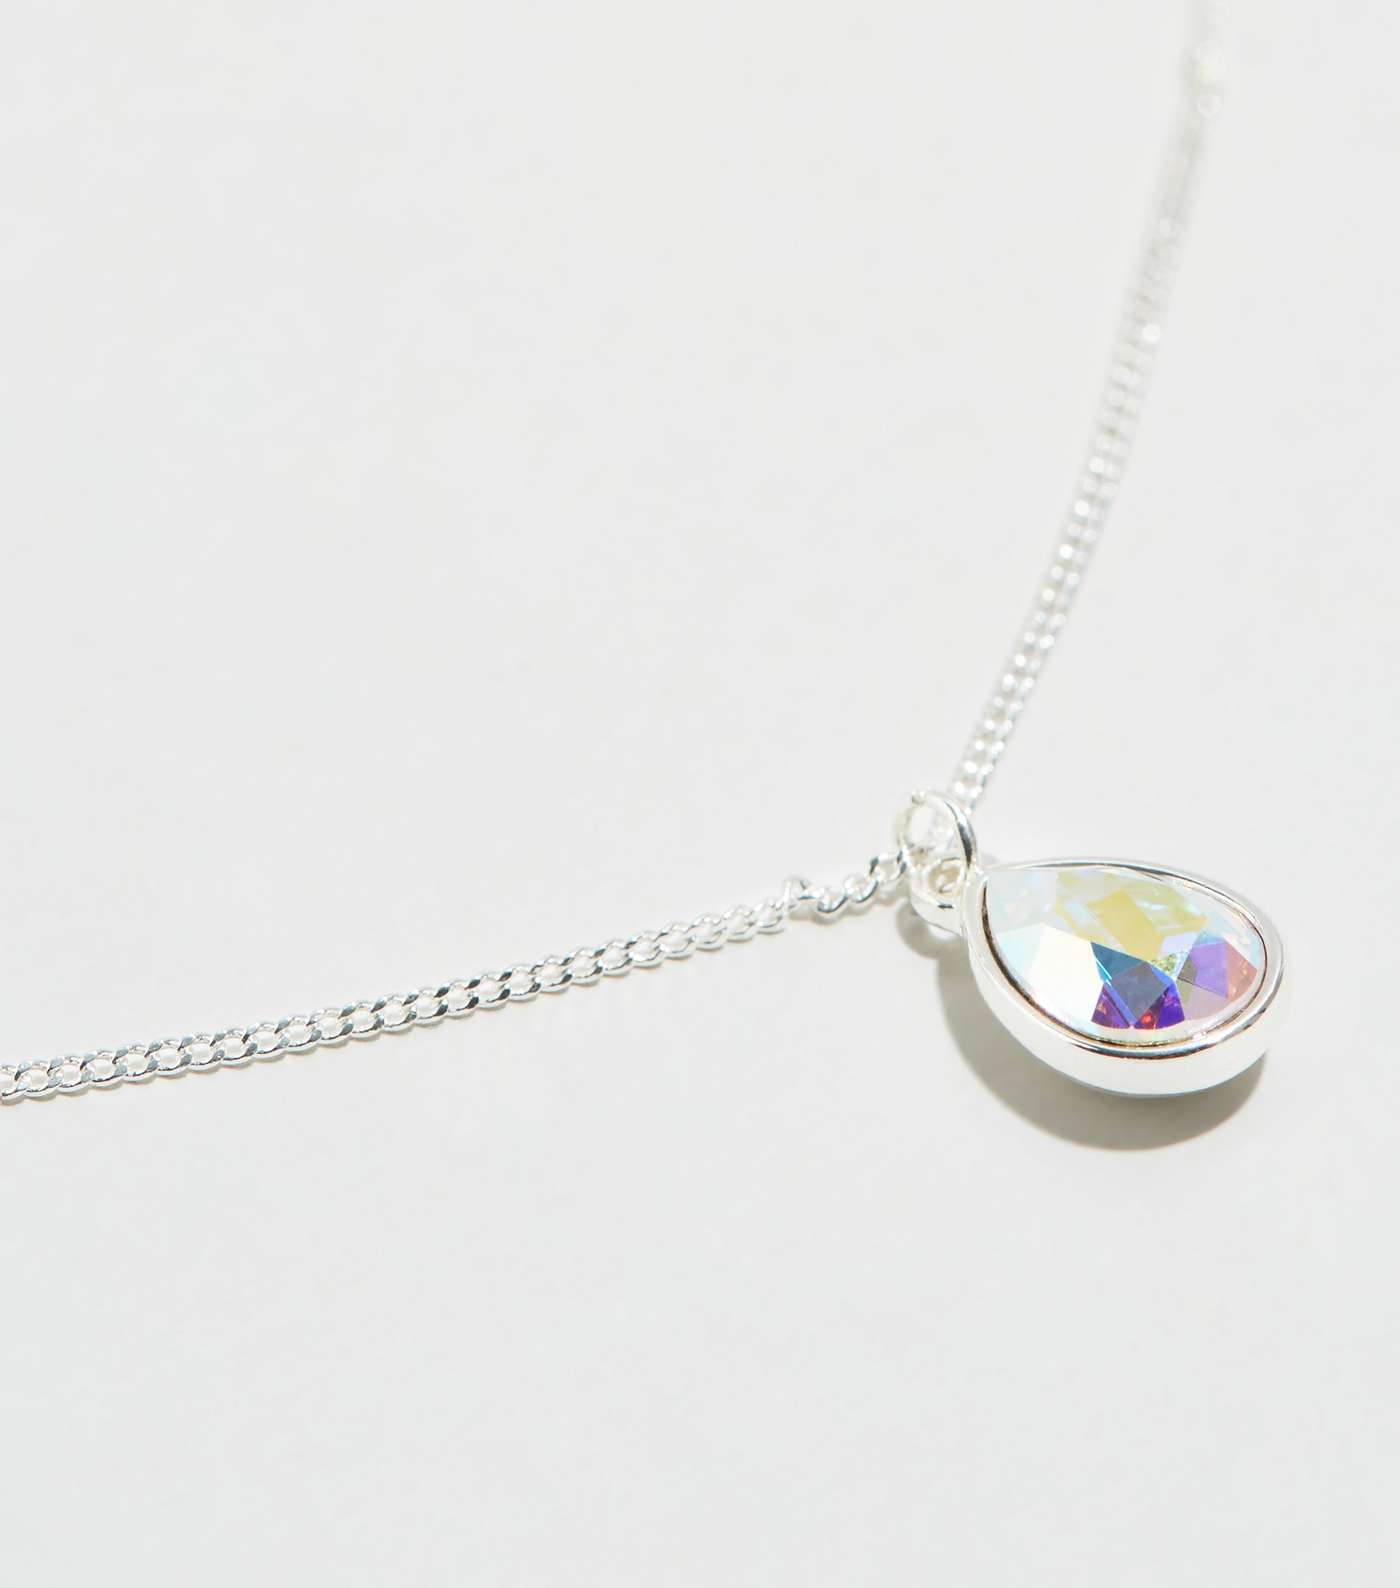 Silver Teardrop Pendant Necklace with Crystals from Swarovski® Image 3